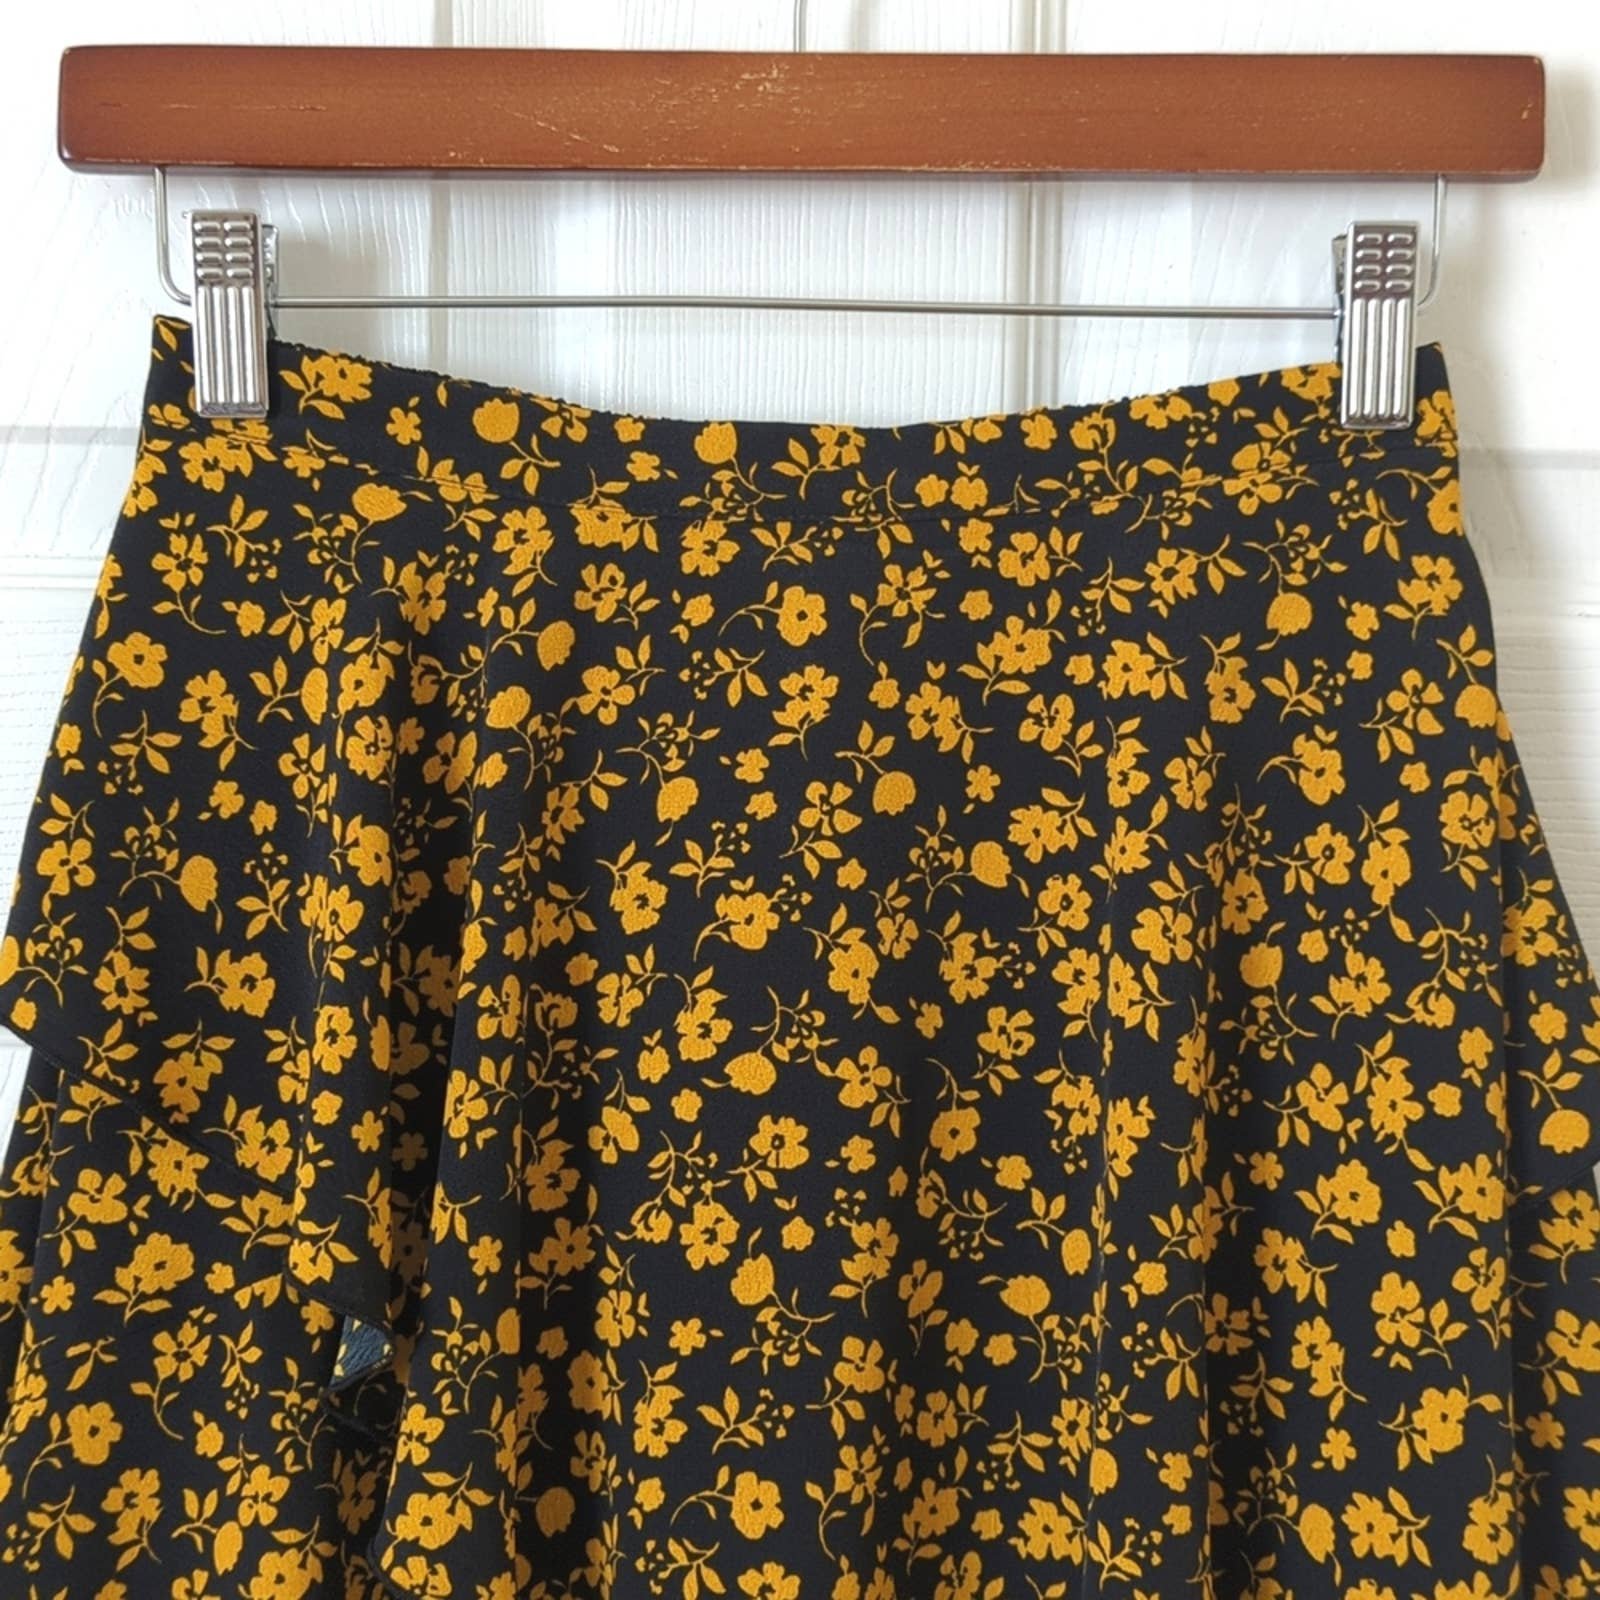 Stylish Topshop Floral Ruffle Layered High Waisted A-Line Mini Skirt Black Yellow Small oXcwxafsG well sale